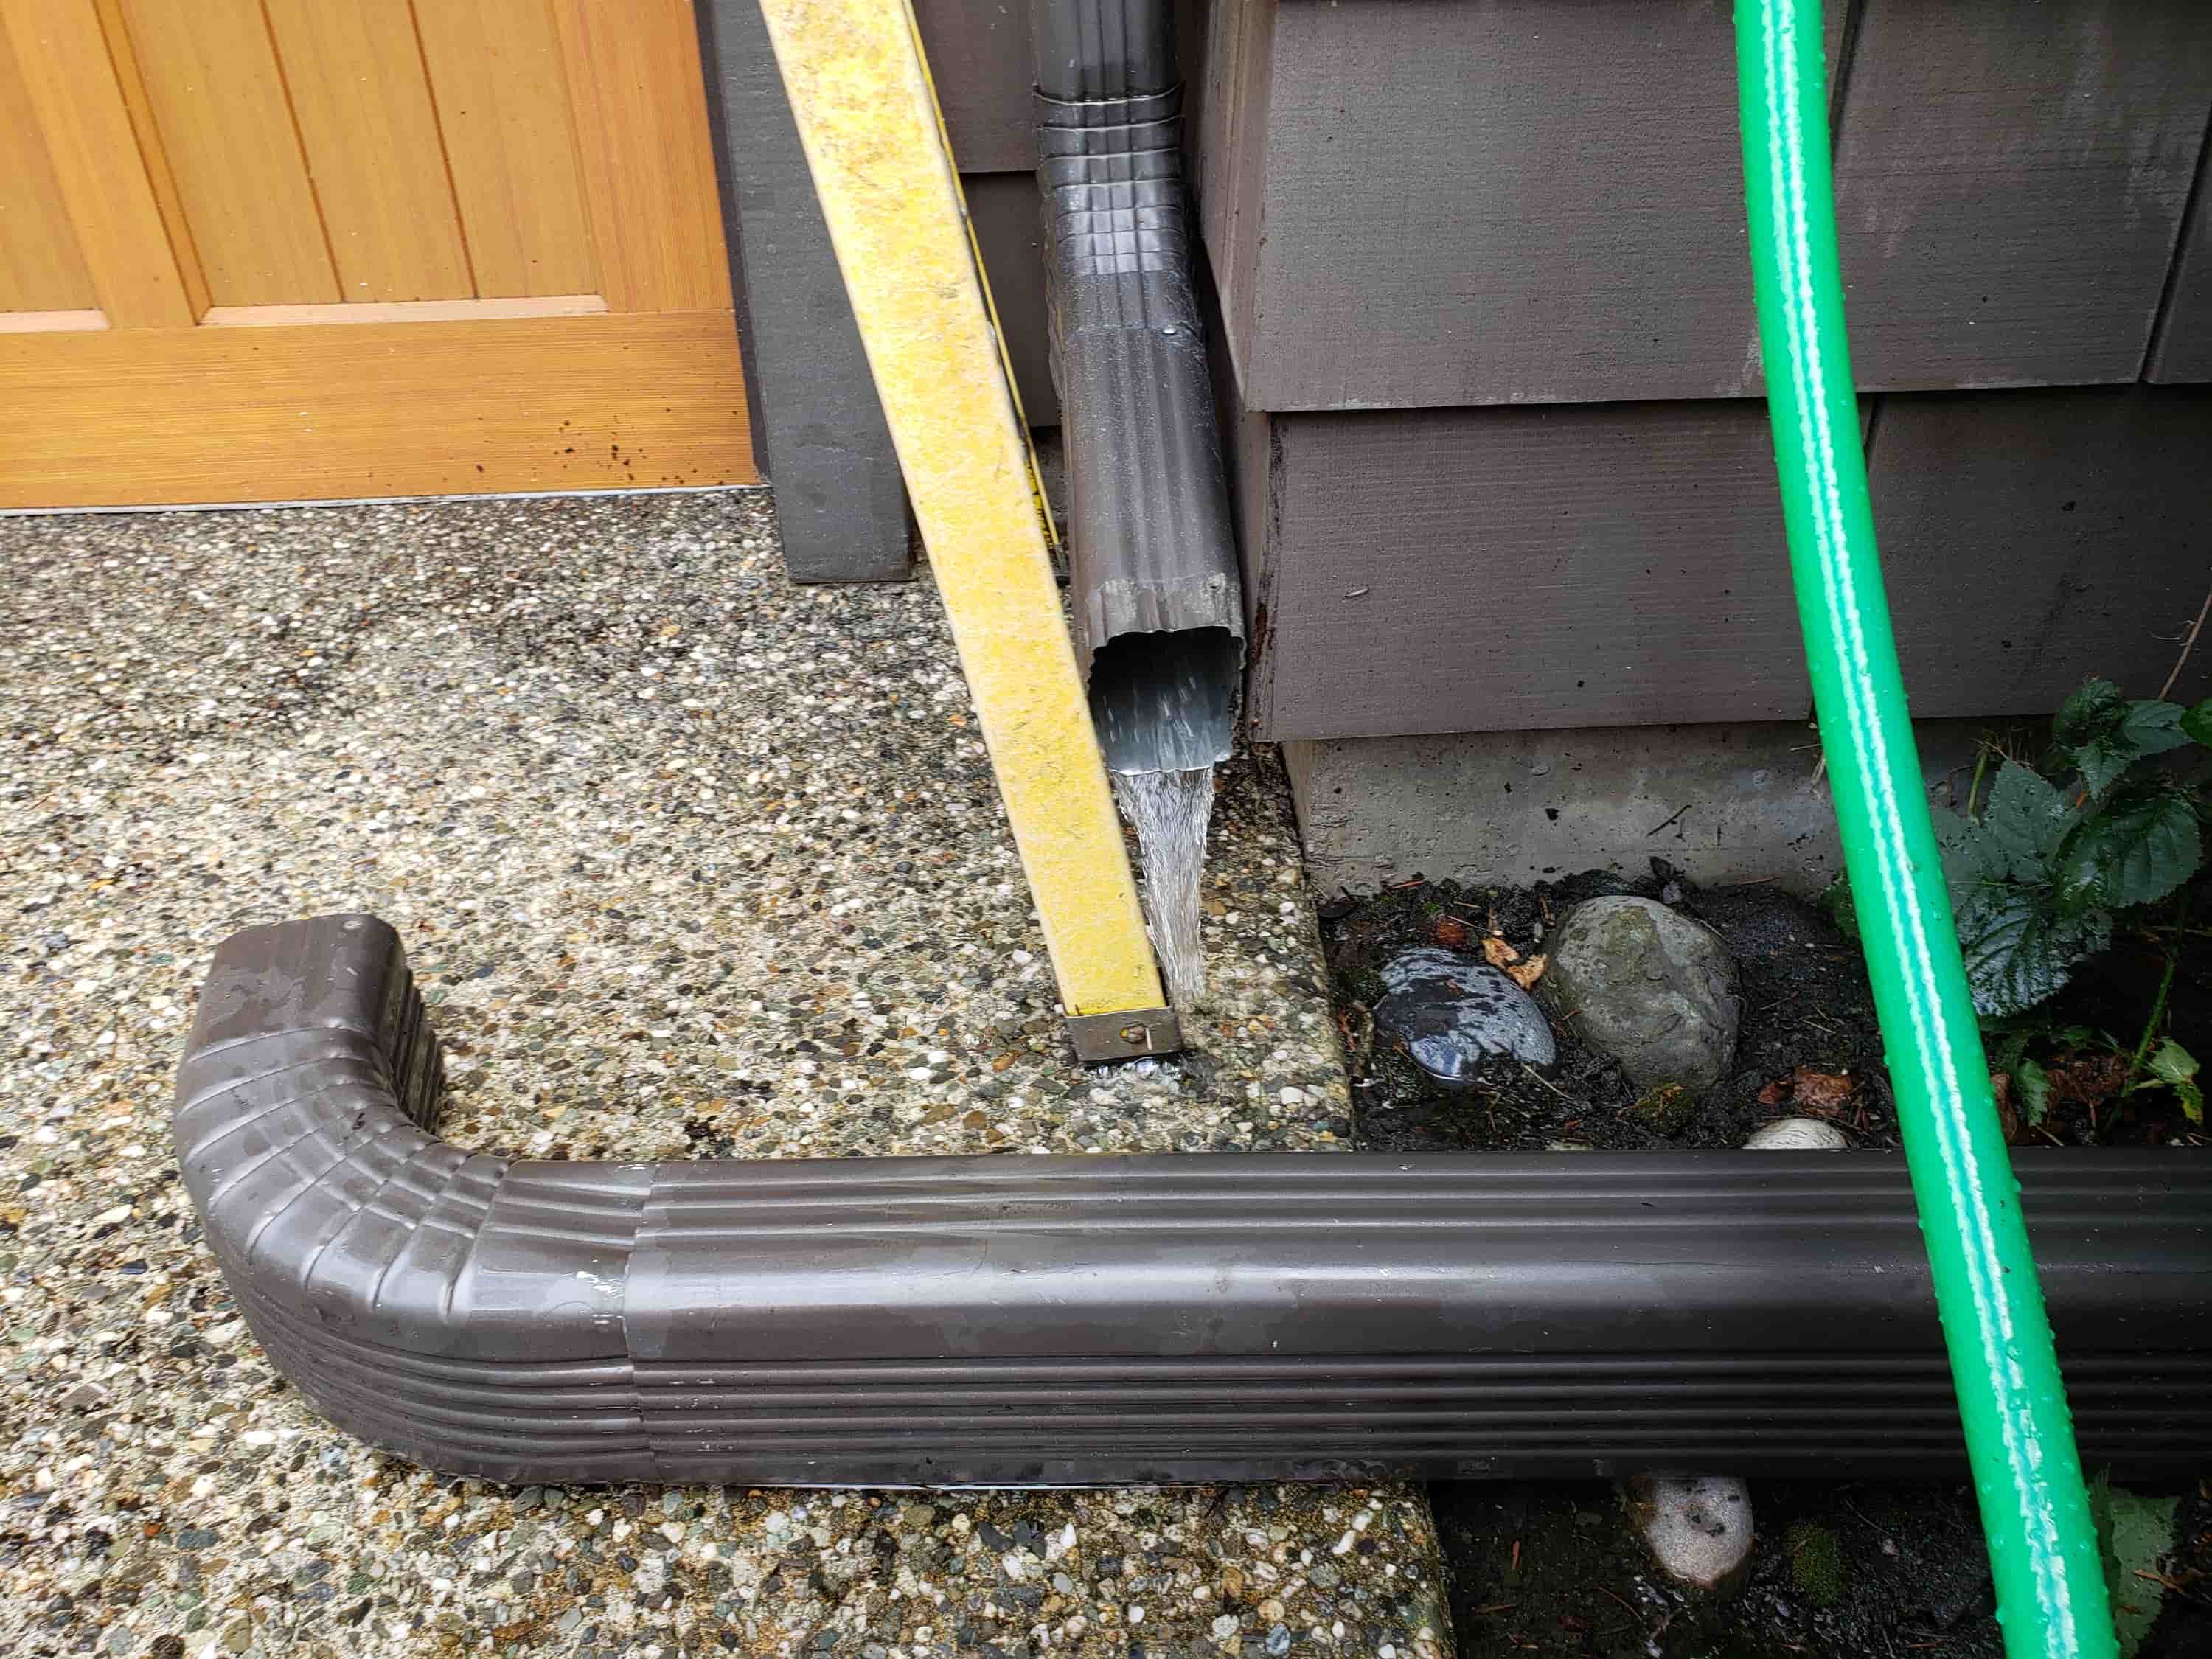 clean out gutter drains